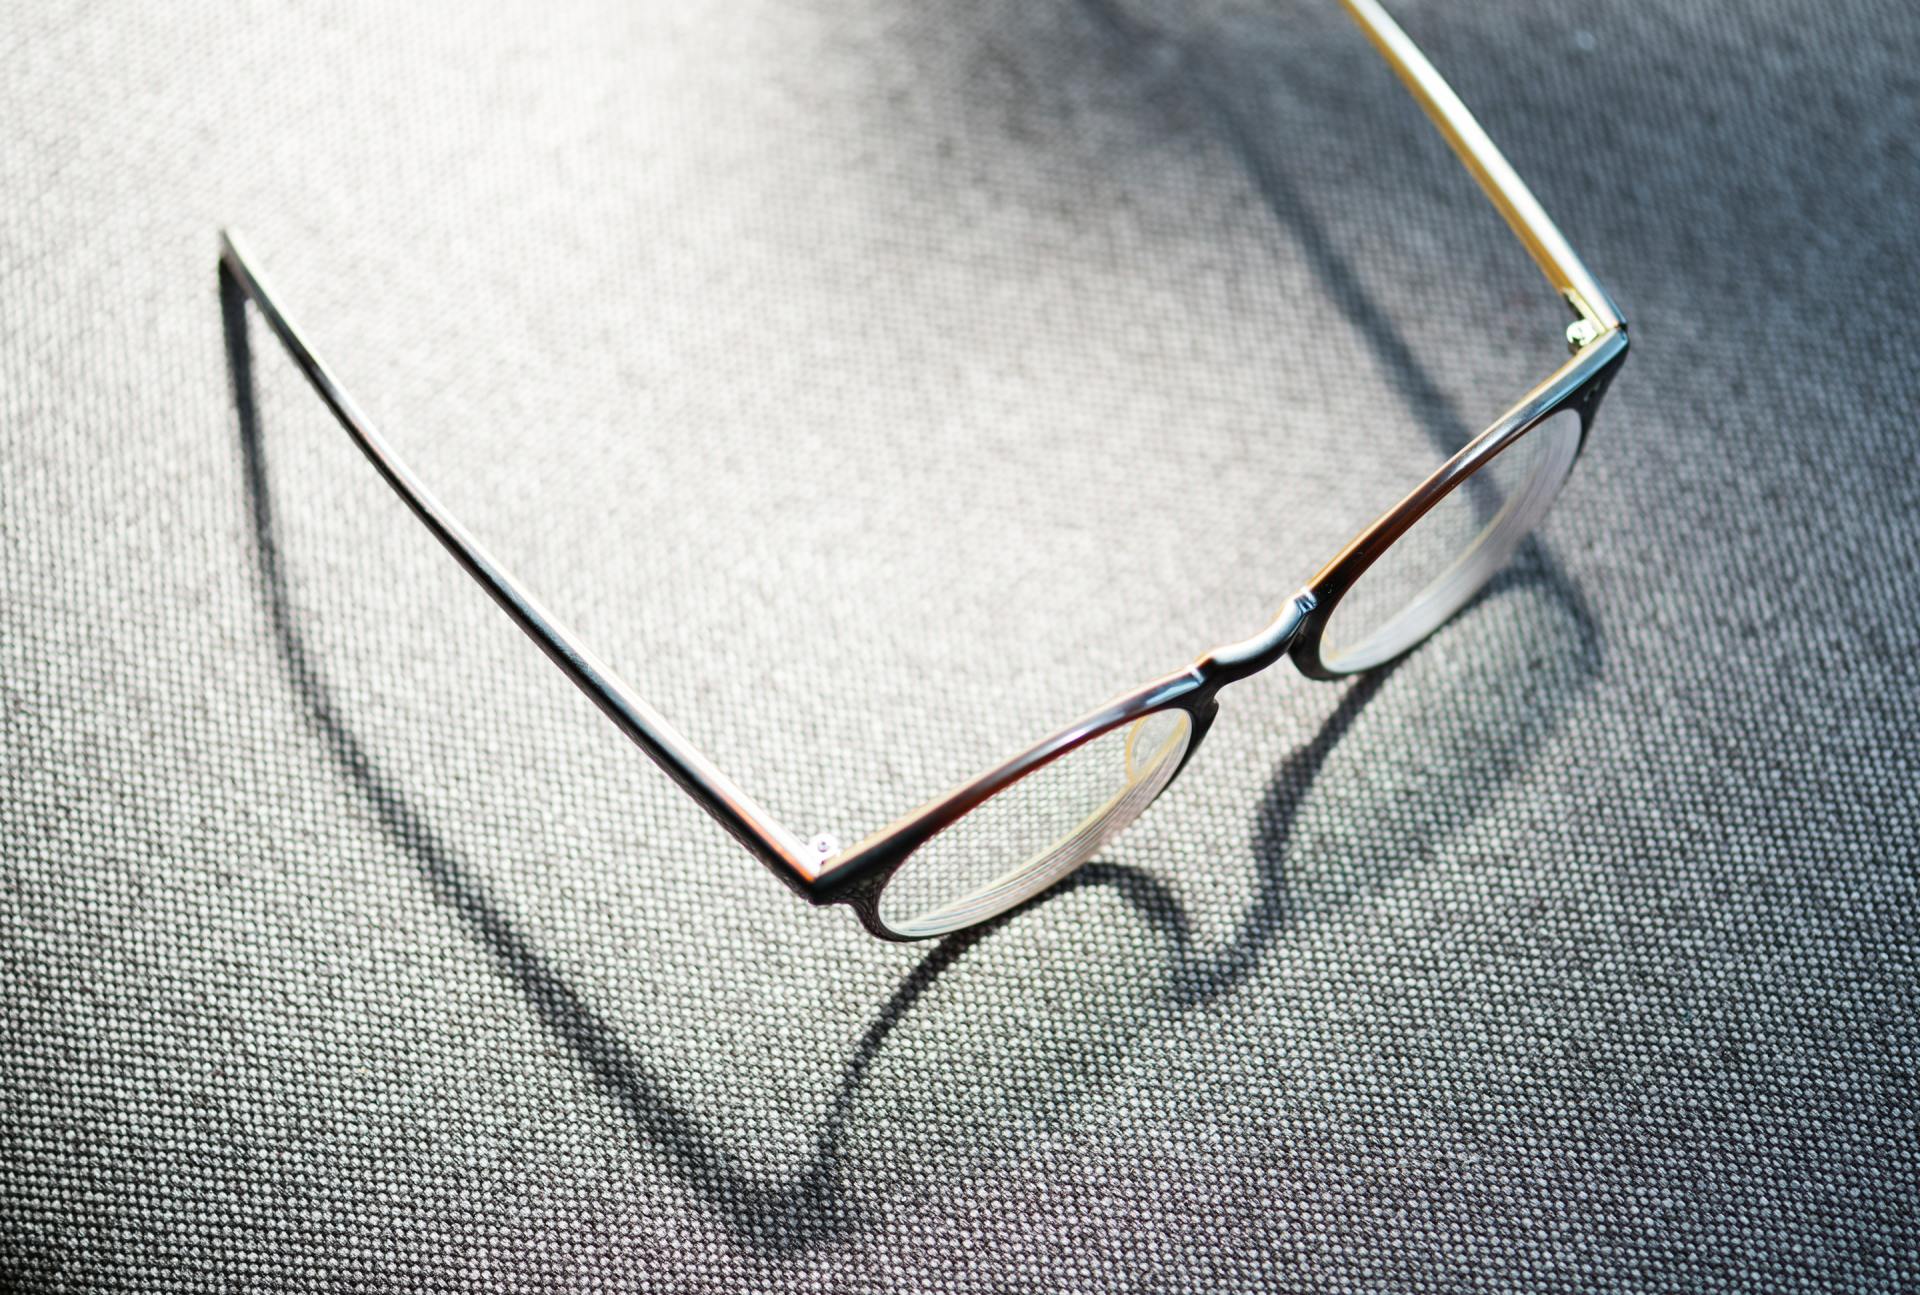 a pair of glasses is laying on a gray surface .